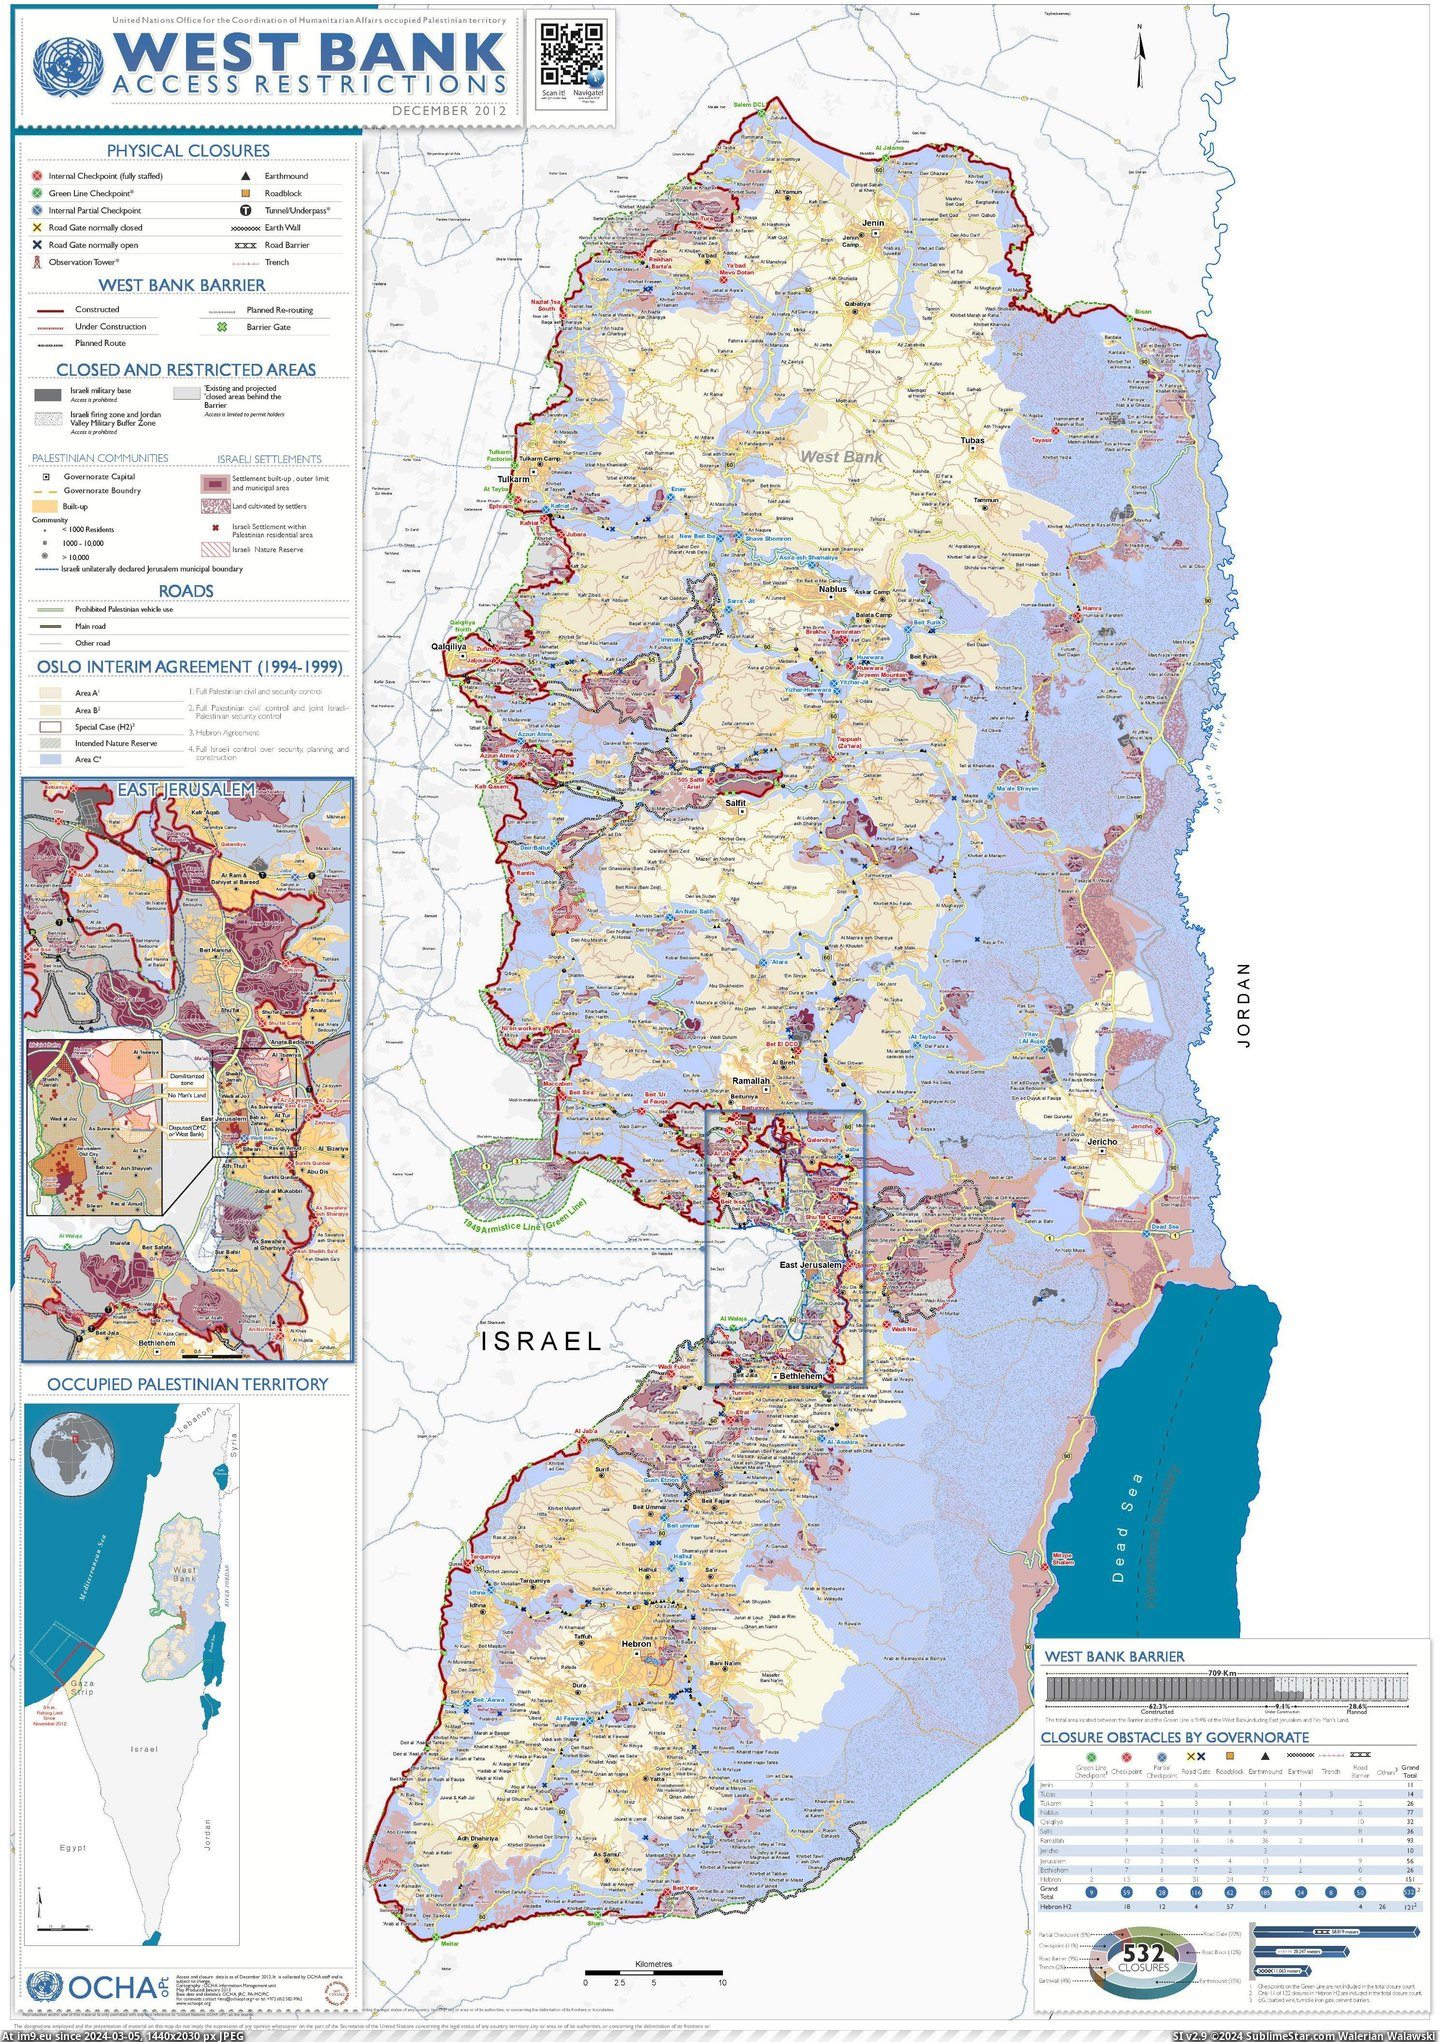 #West #Bank #Restrictions #Access [Mapporn] West Bank Access Restrictions (December 2012) [4967x7022] Pic. (Изображение из альбом My r/MAPS favs))